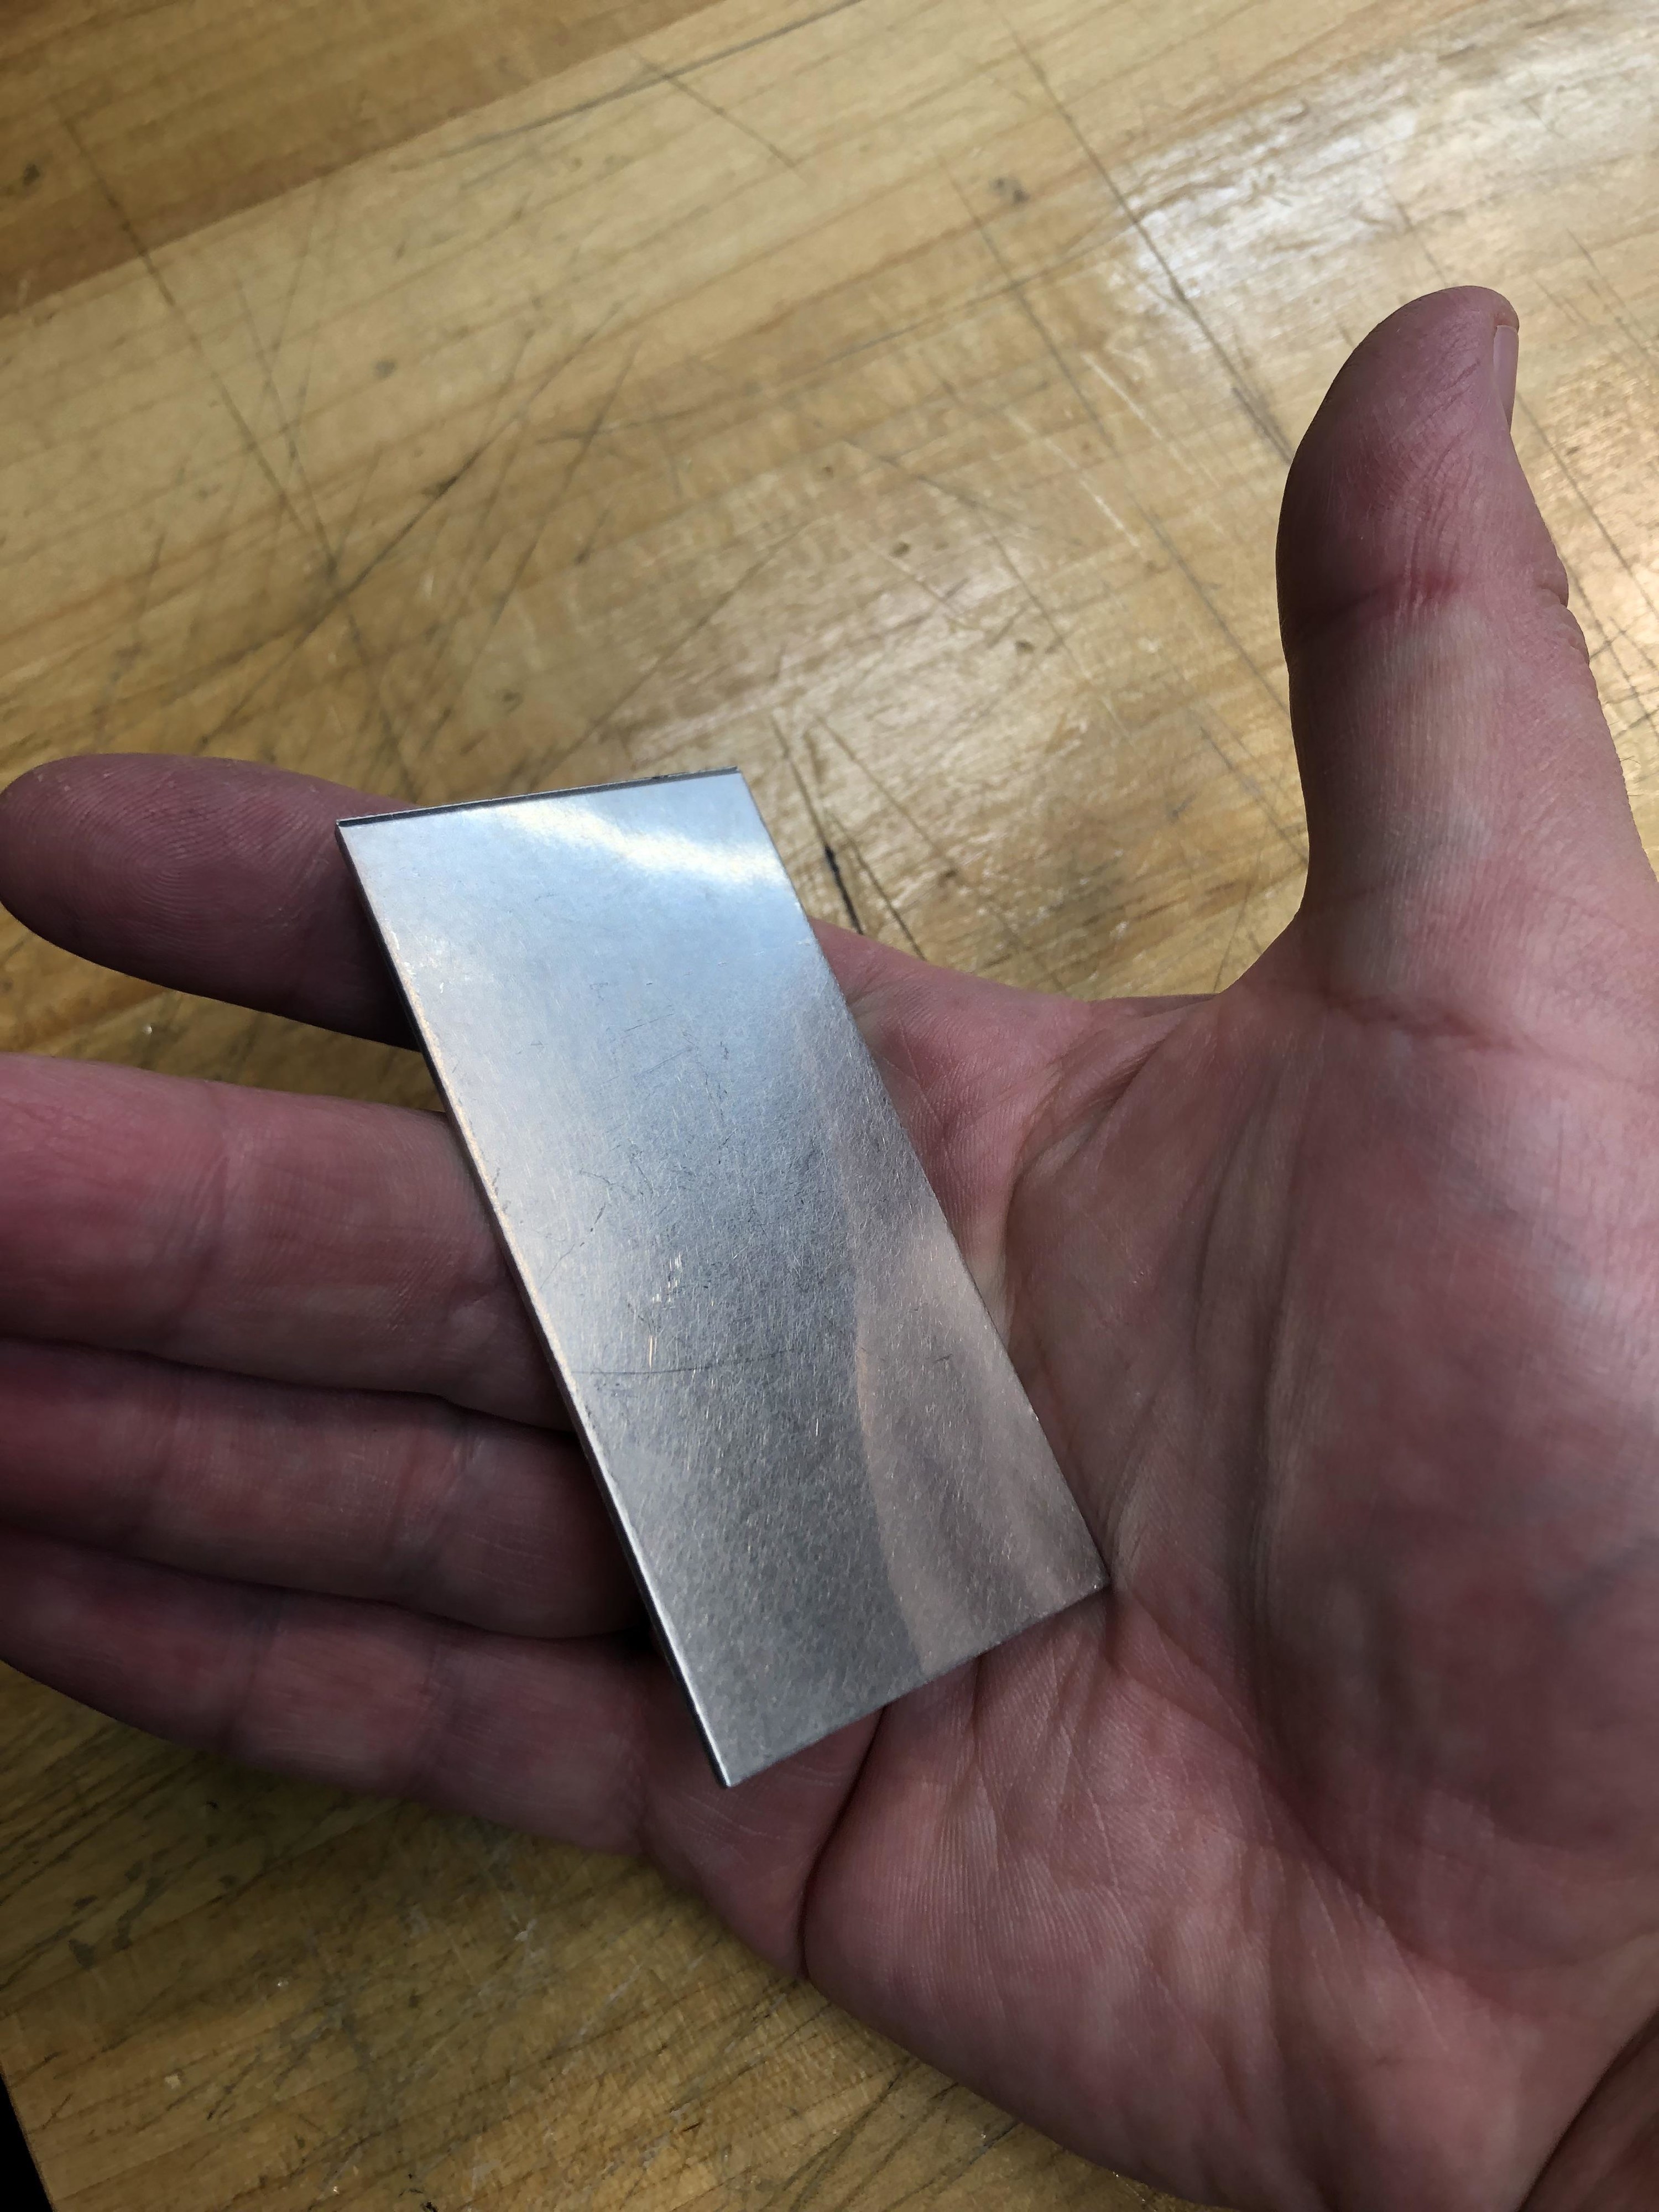 A hand holding a very thin, small rectangle of platinum